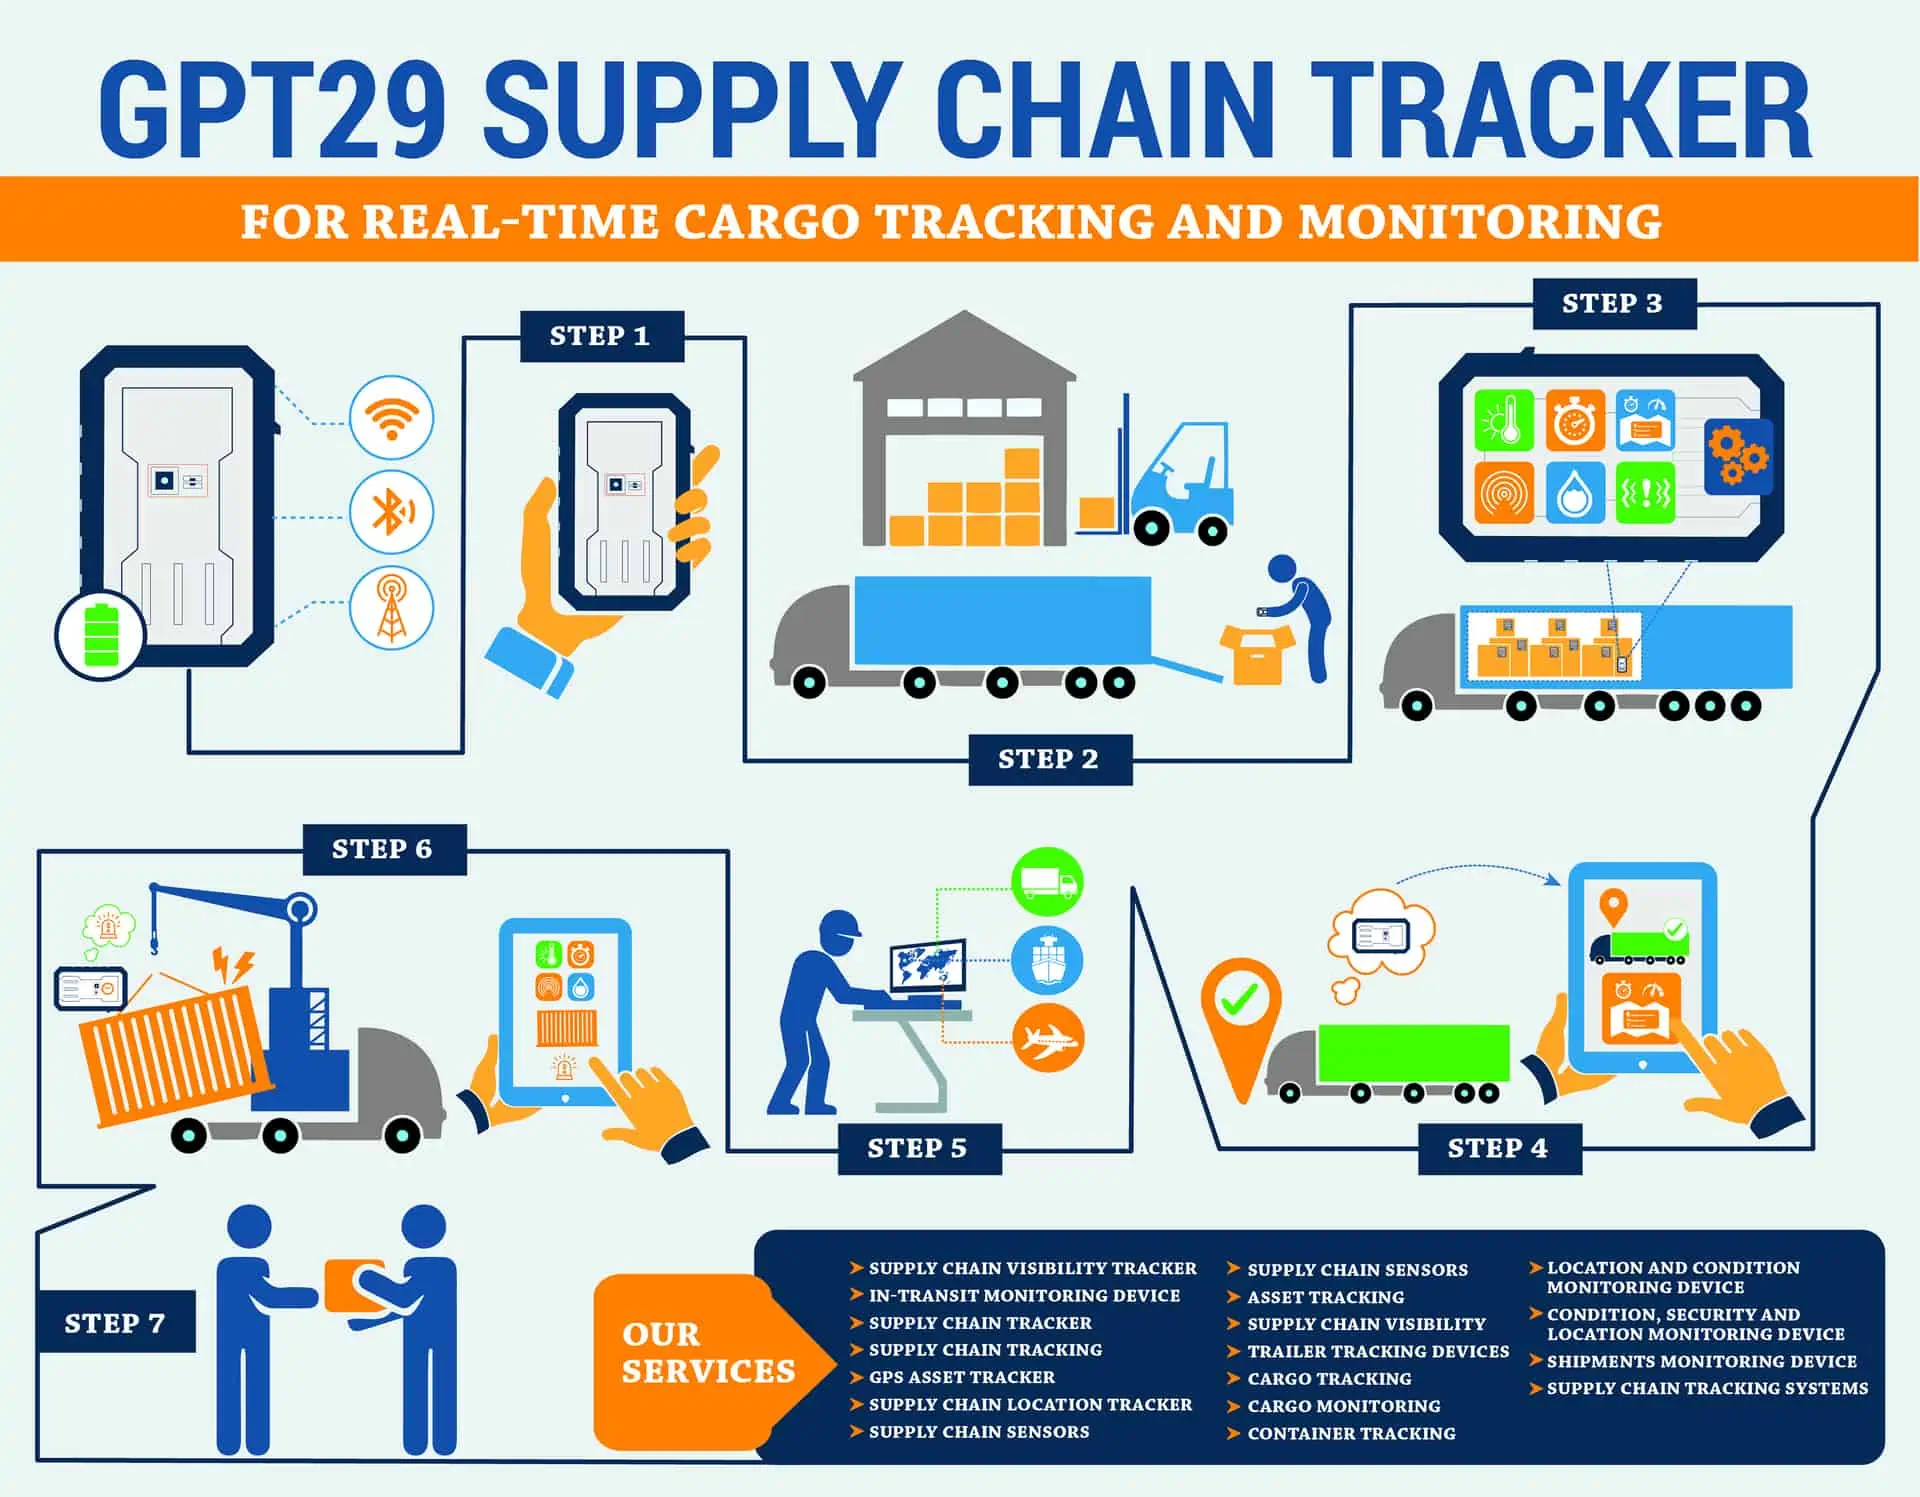 GPT29 SUPPLY CHAIN TRACKER FOR REAL-TIME CARGO TRACKING AND MONITORING